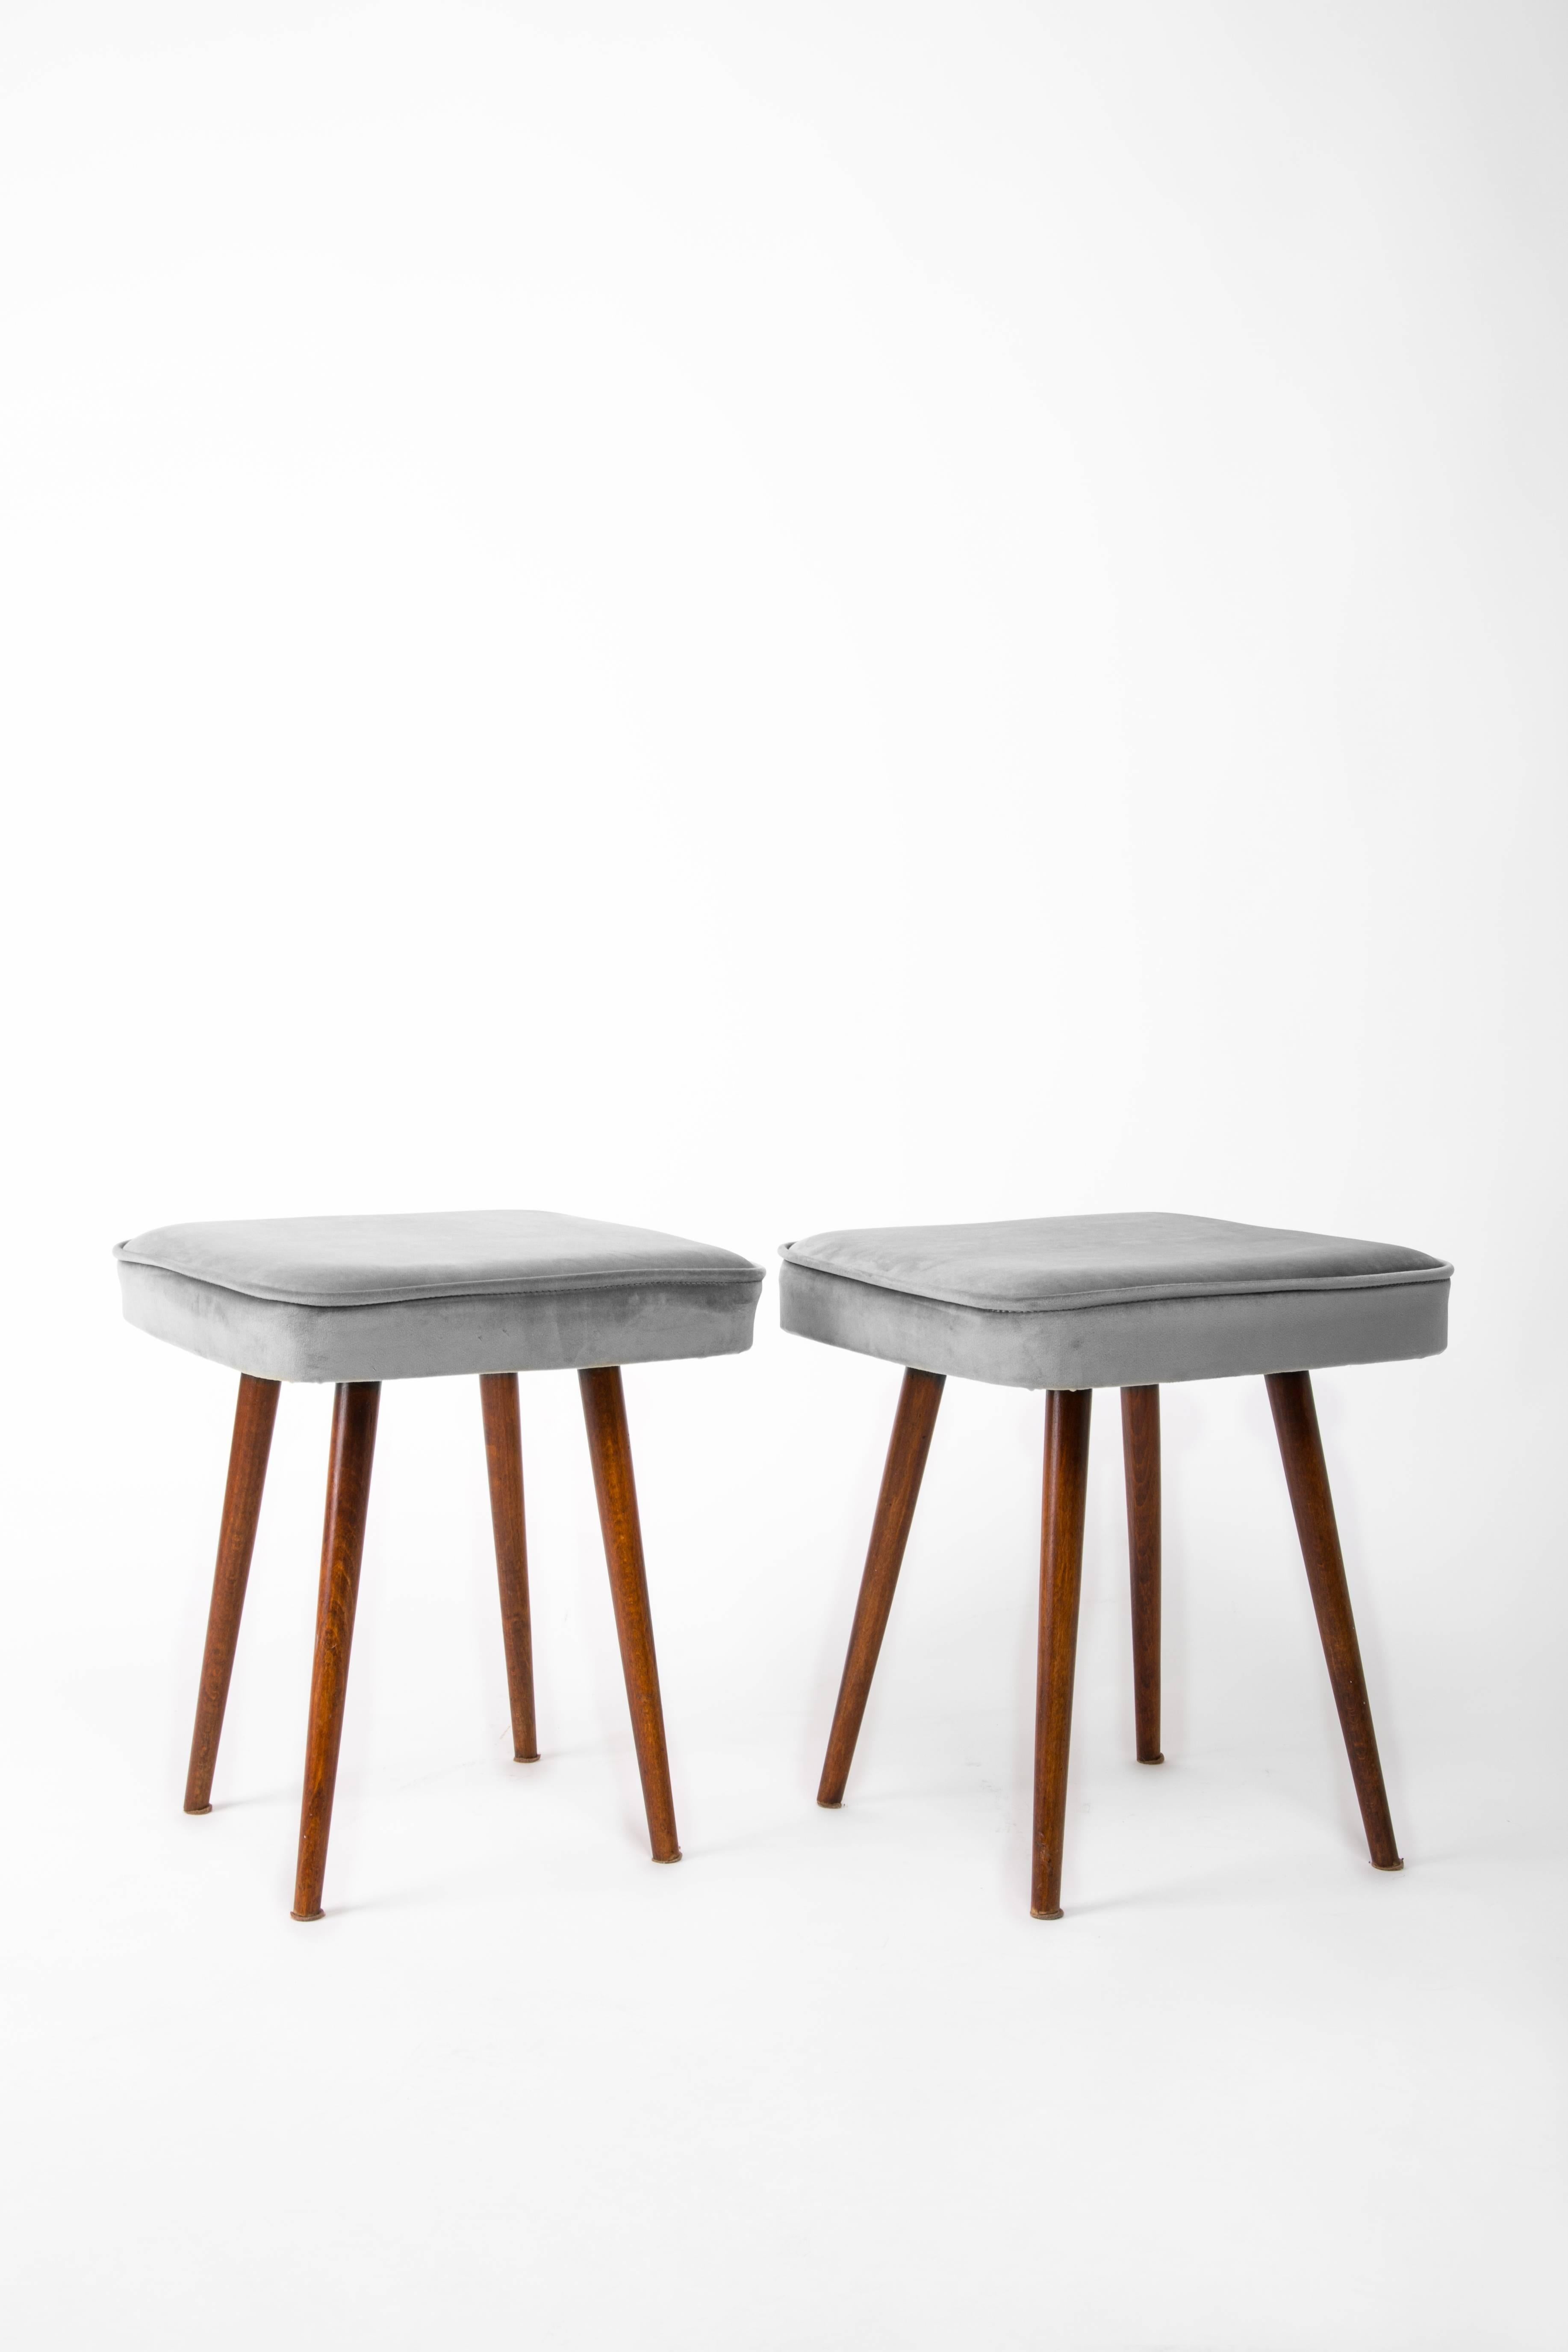 Stool from the turn of the 1960s and 1970s. Beautiful gray velor upholstery. The stool consists of an upholstered part, a seat and wooden legs narrowing downwards, characteristic of the 1960s style. We can prepare this pair also in another color of